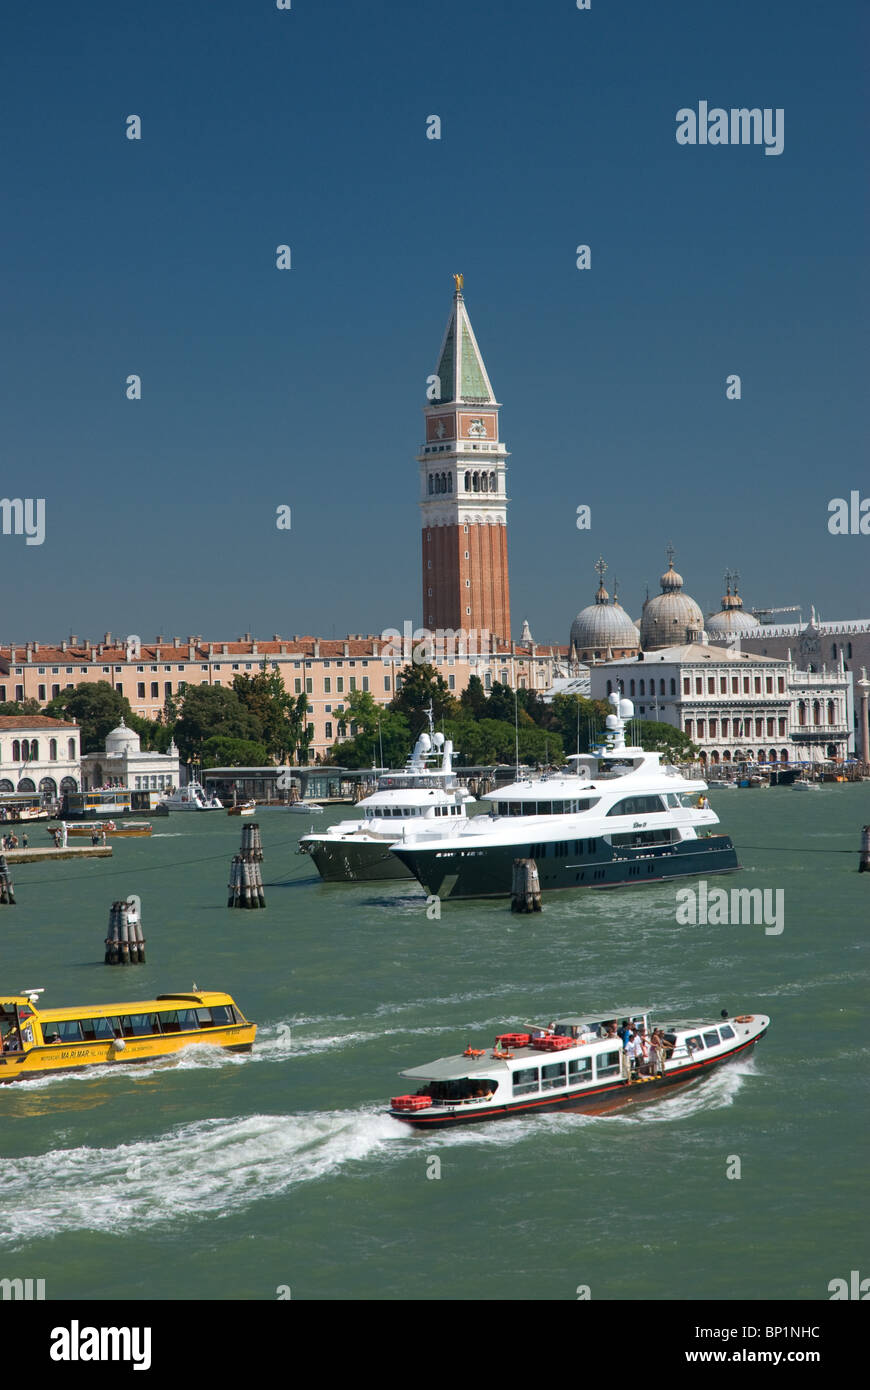 Campanile di San Marco or Bell Tower and canal, St Marks, Venice Italy Stock Photo